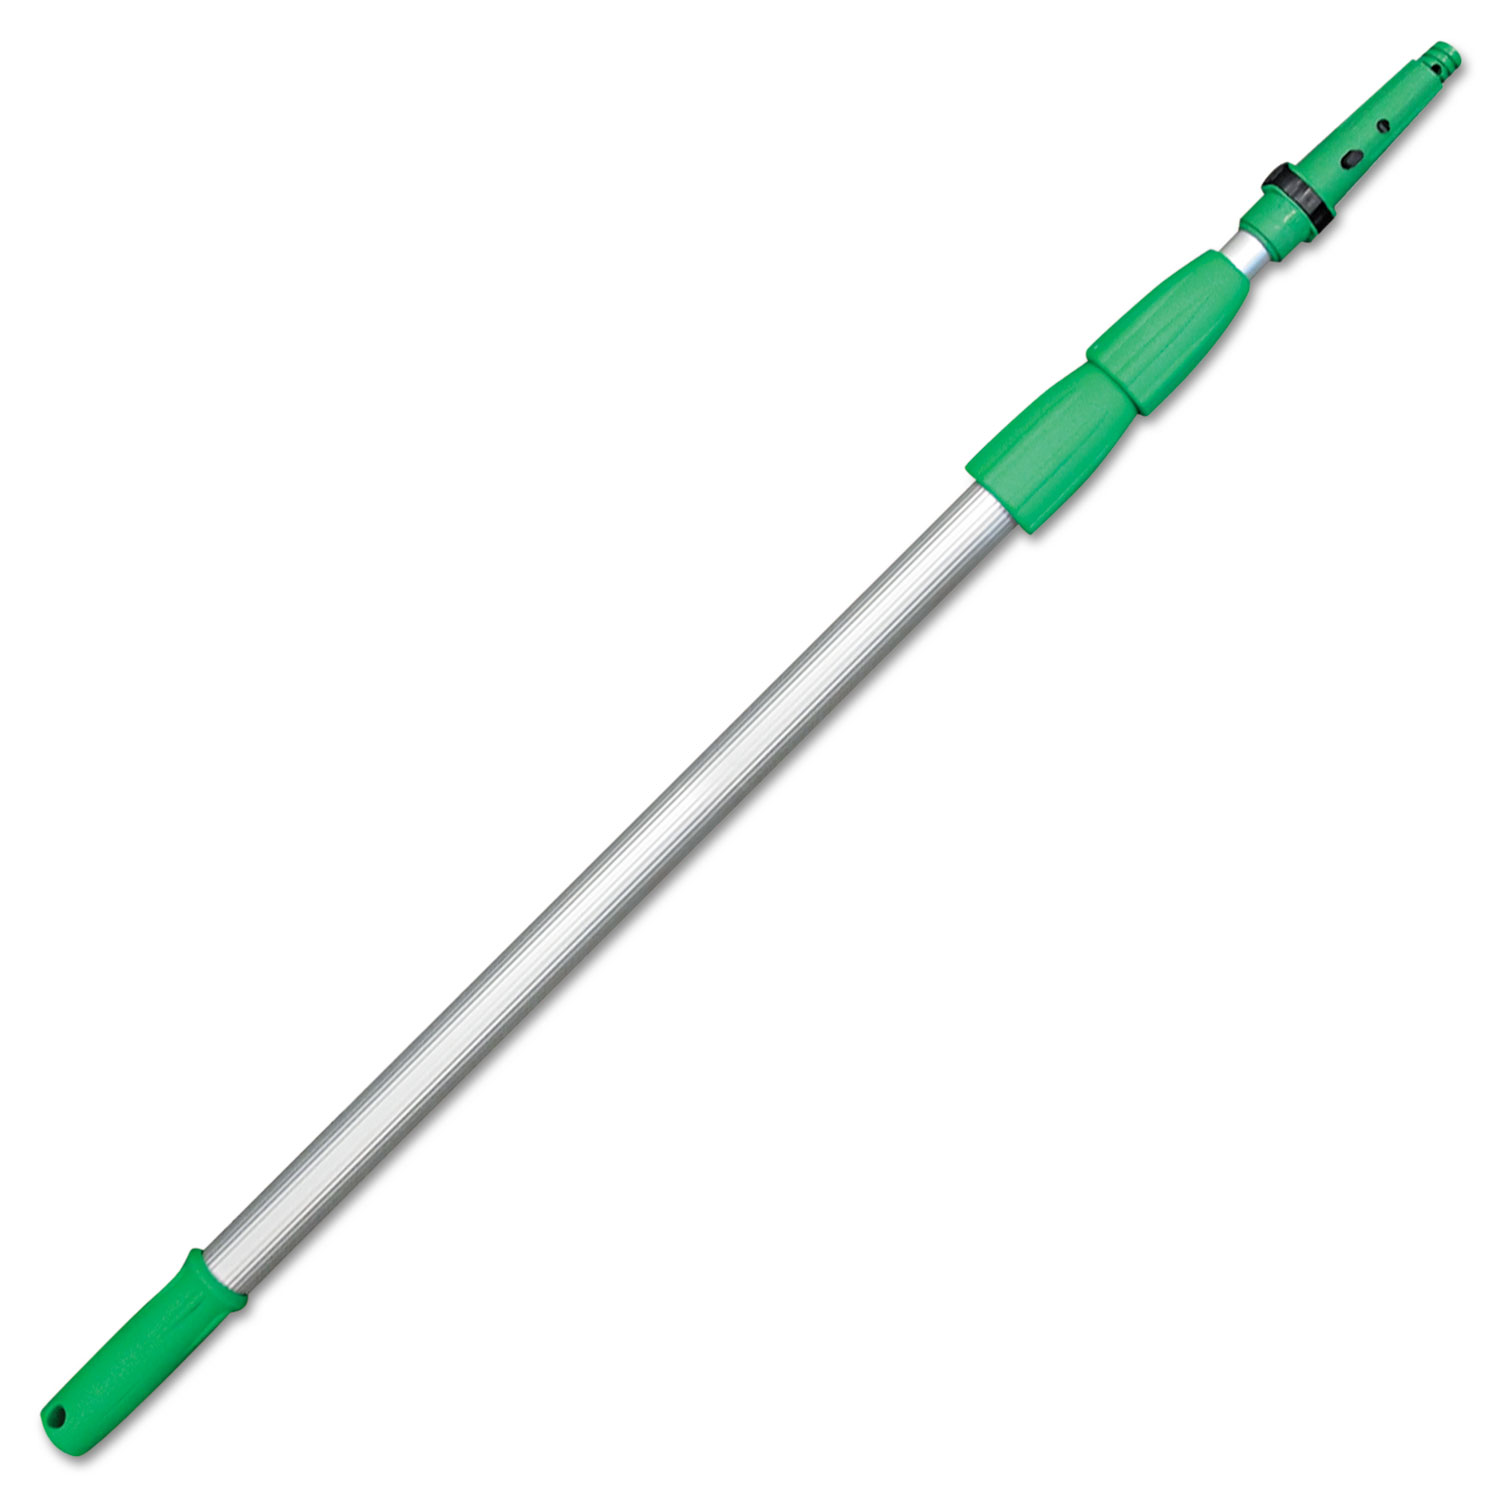  Unger ED600 Opti-Loc Aluminum Extension Pole, 20 ft, Three Sections, Green/Silver (UNGED600) 